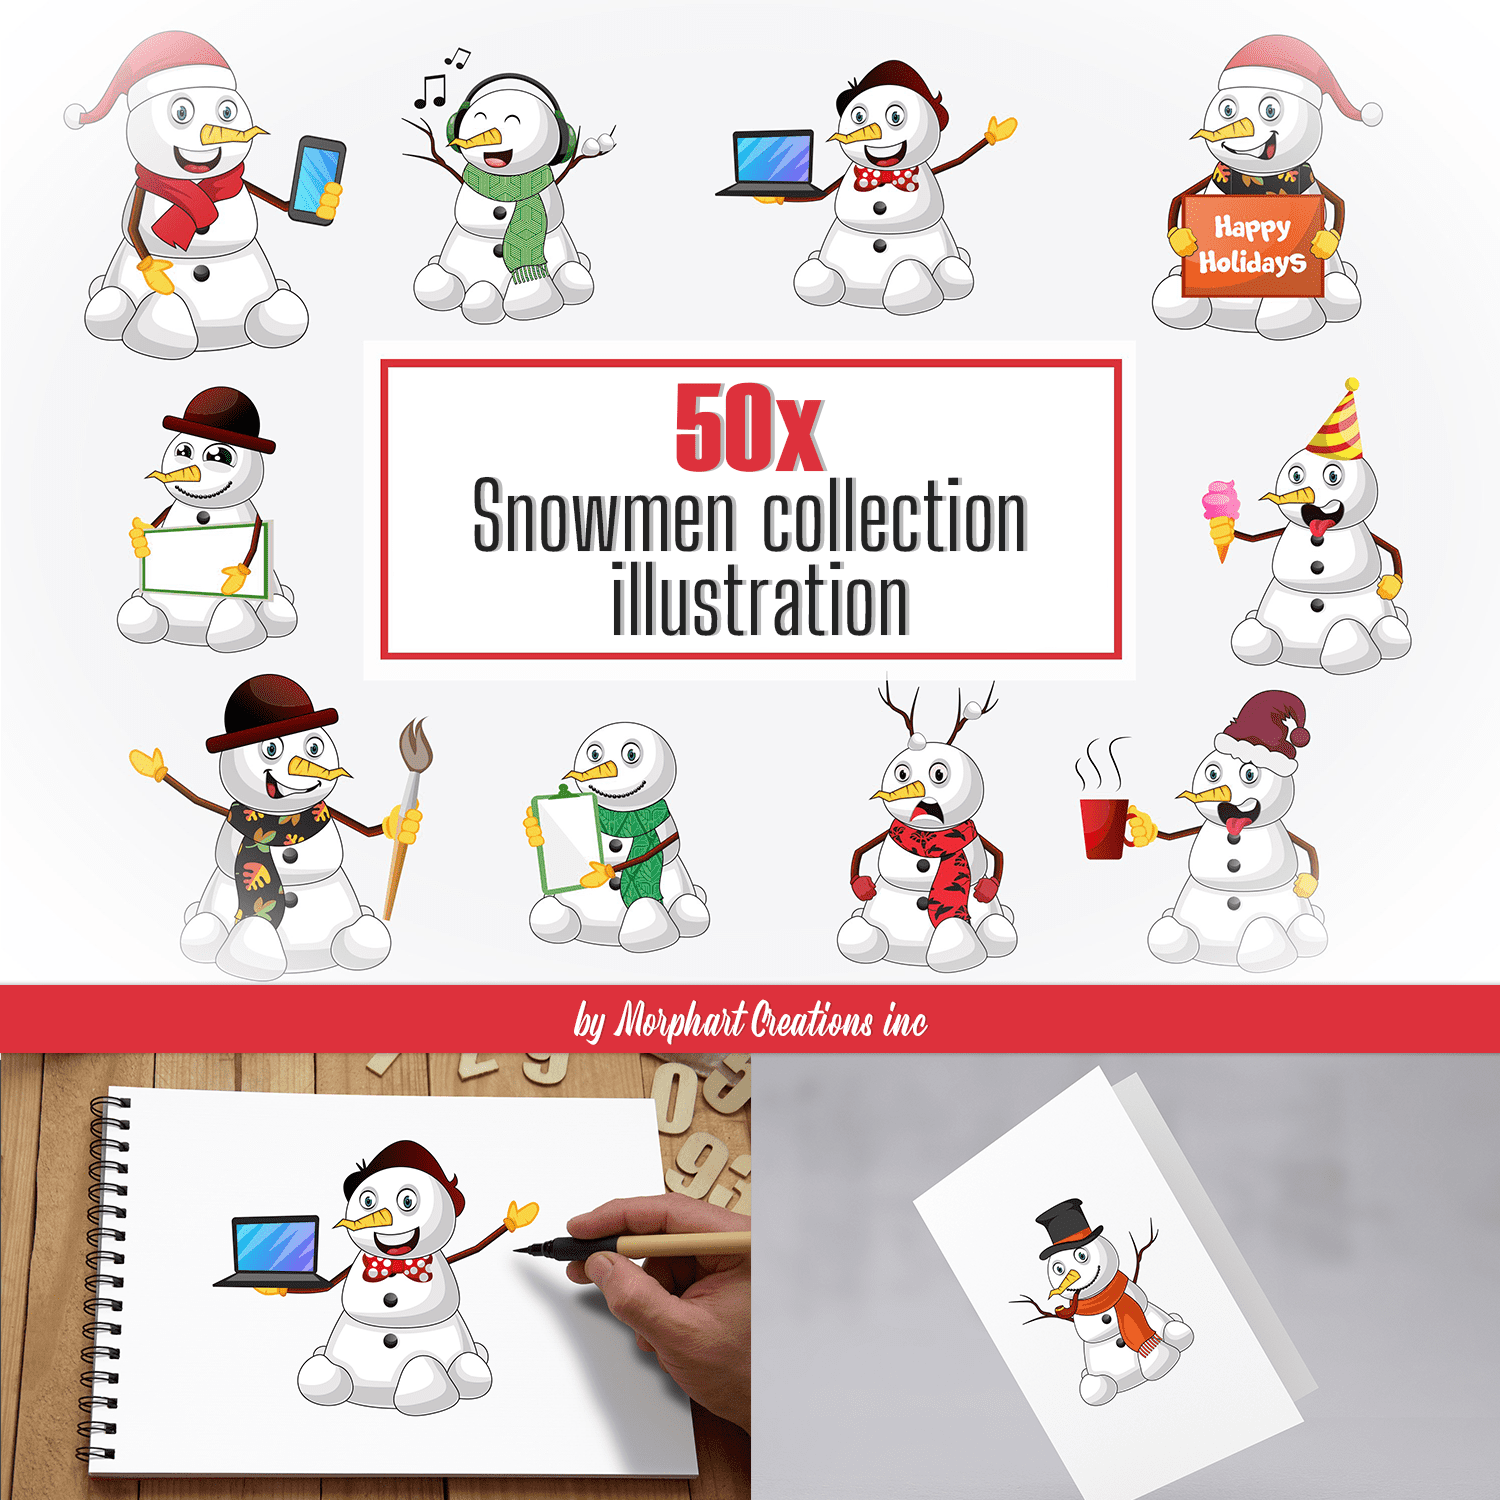 Collection of images of enchanting snowmen.